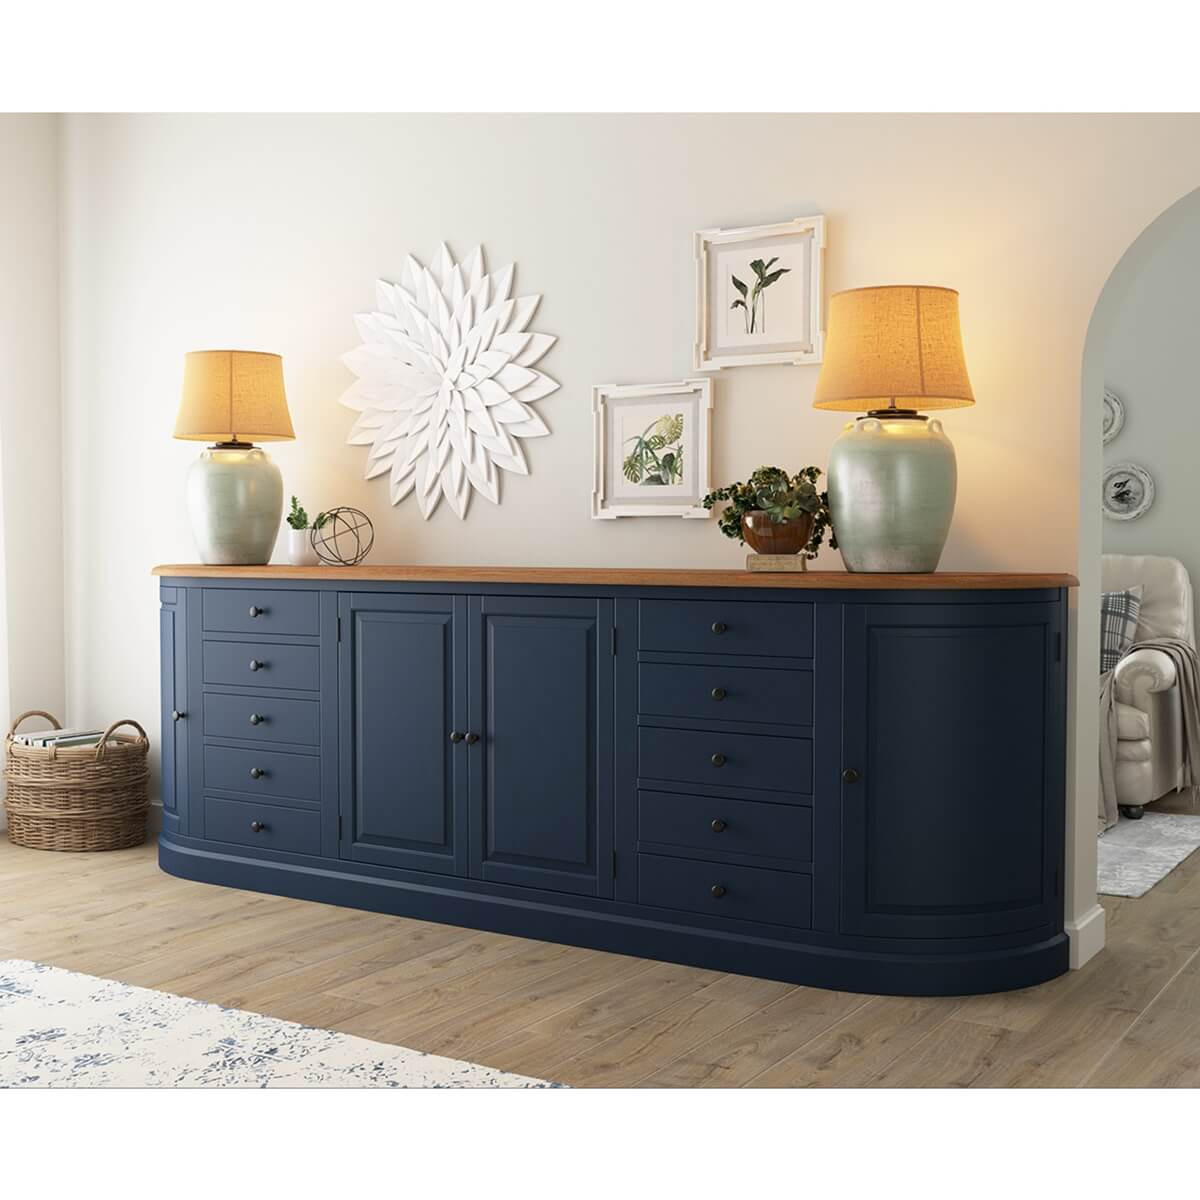 Extra Large Buffets Sideboards - Photos & Ideas | Houzz